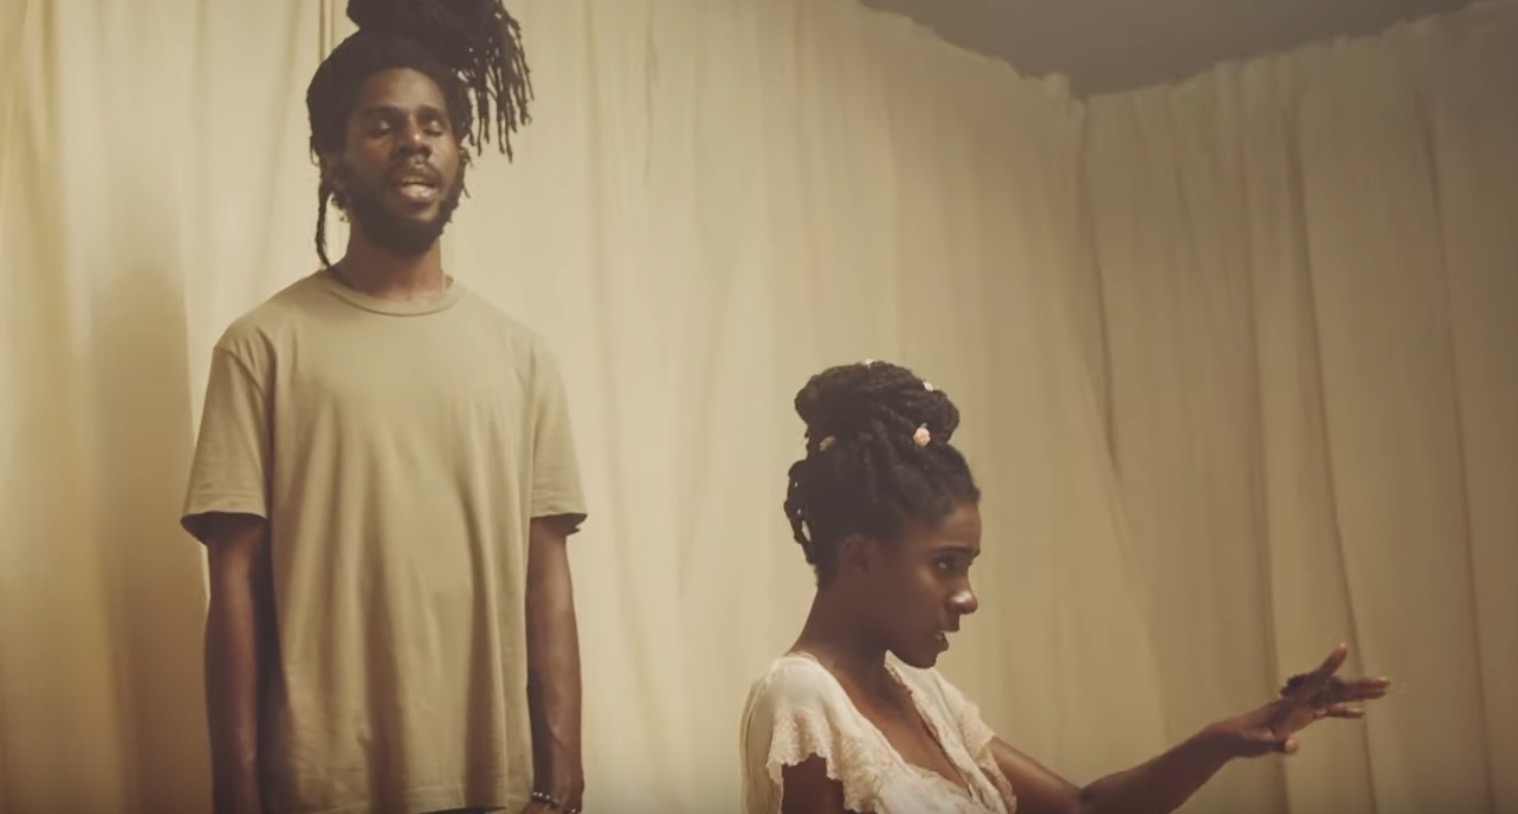 WATCH: Jah9 and Chronixx Uplifting "Note To Self, OK" Music Video